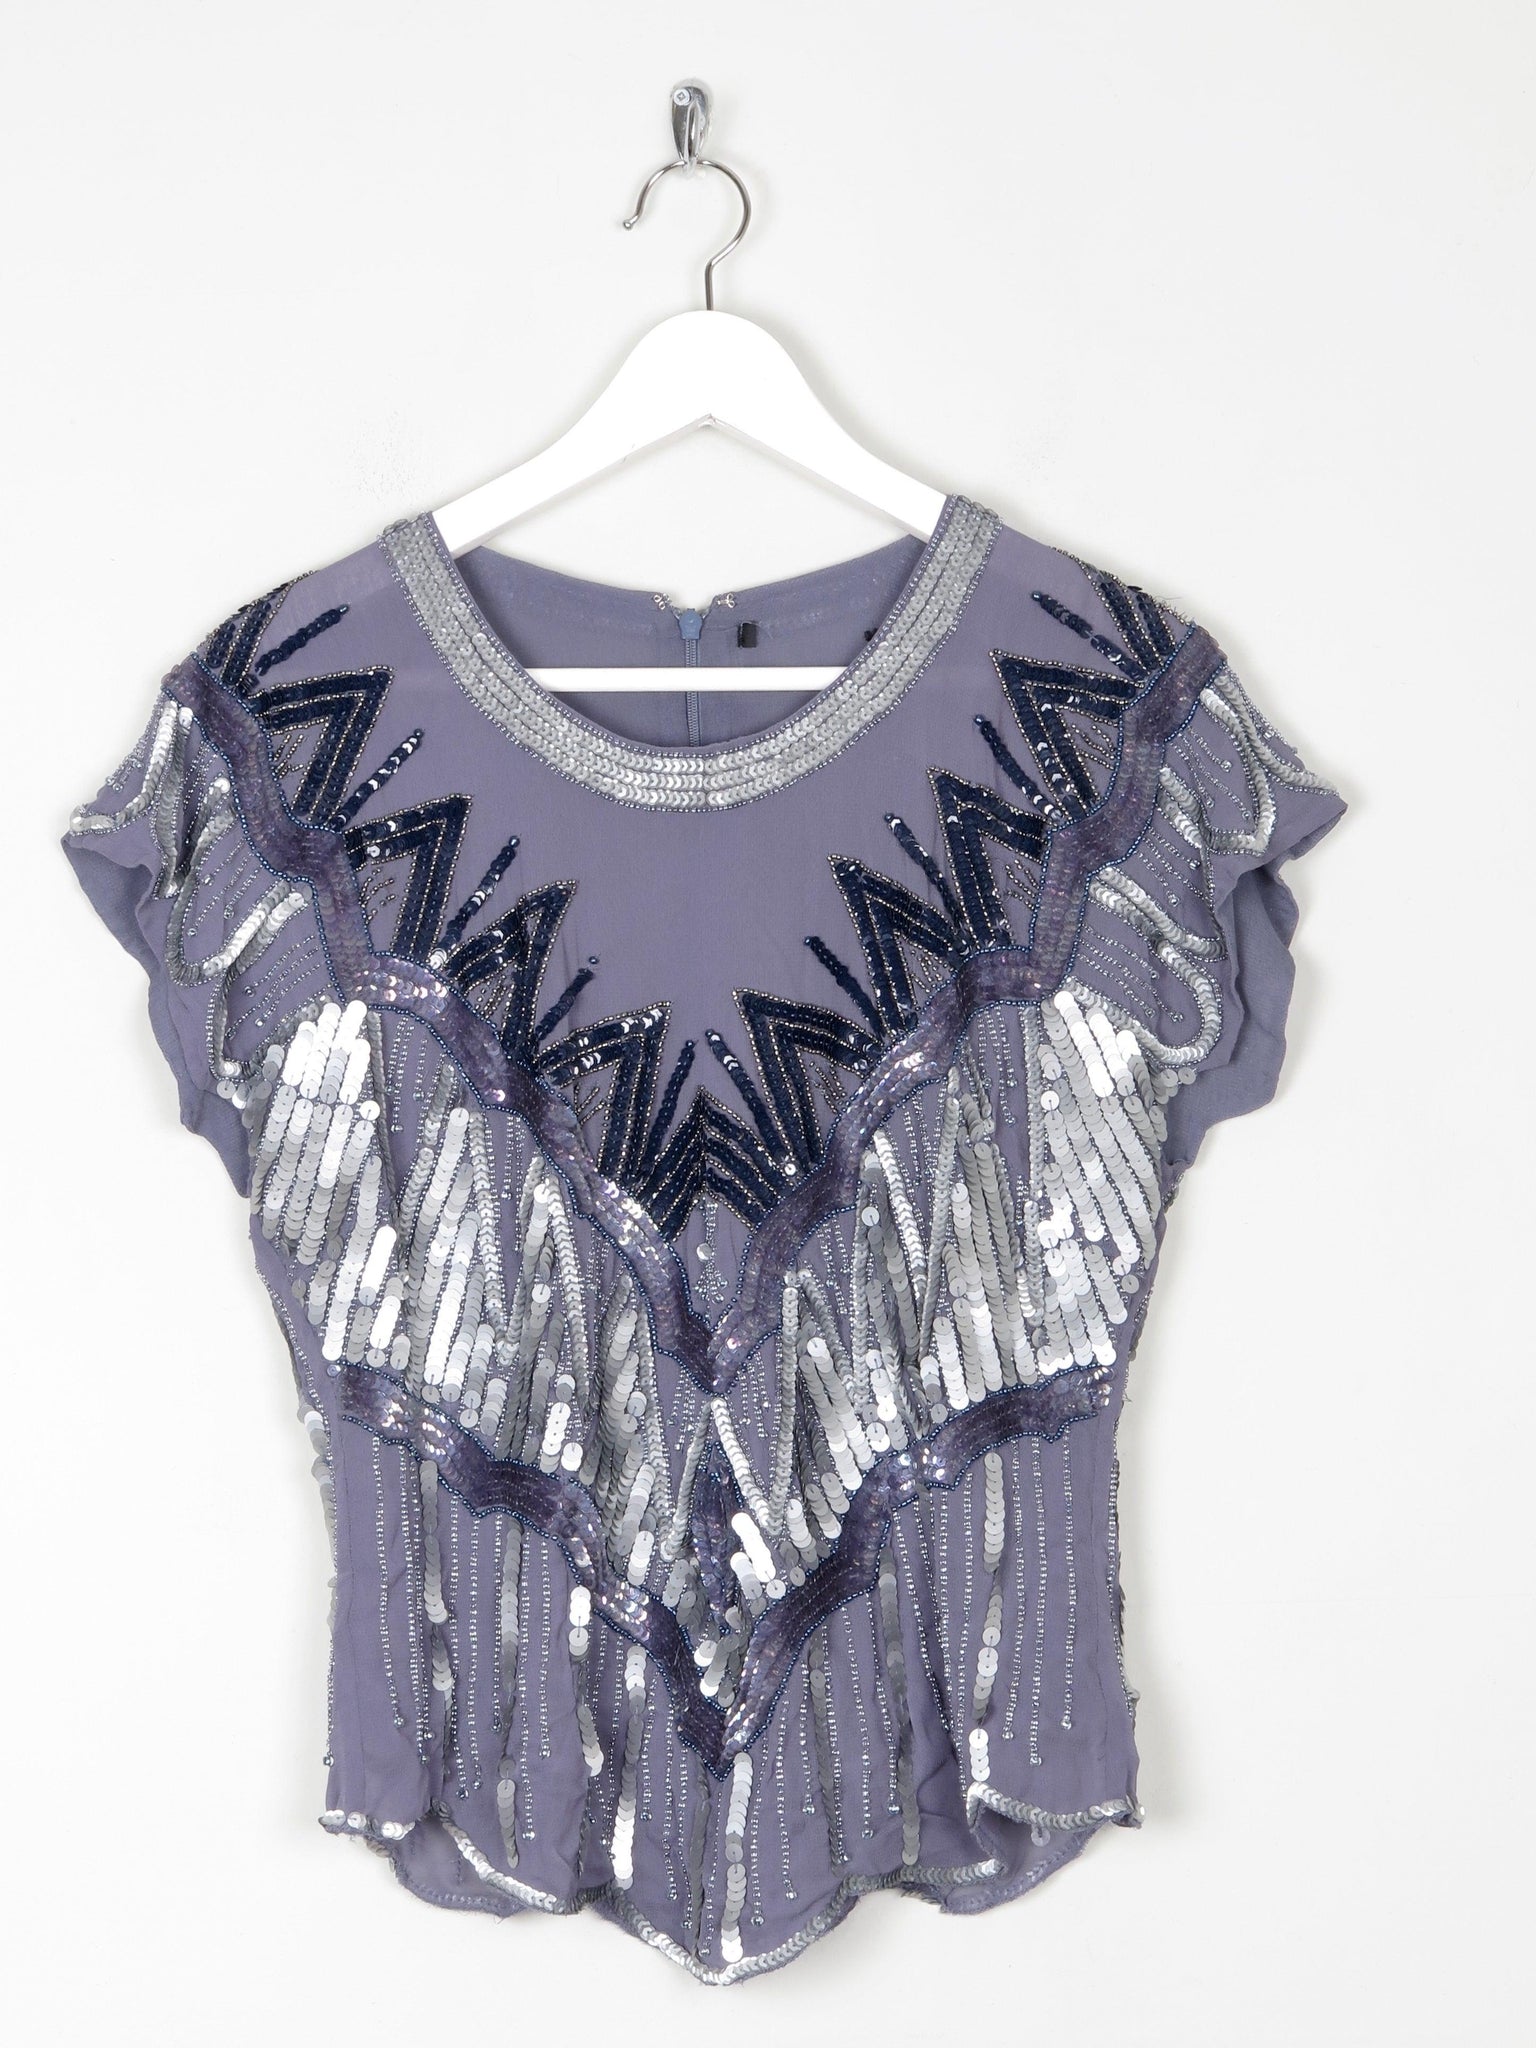 Grey & Blue Beaded Top 10 - The Harlequin